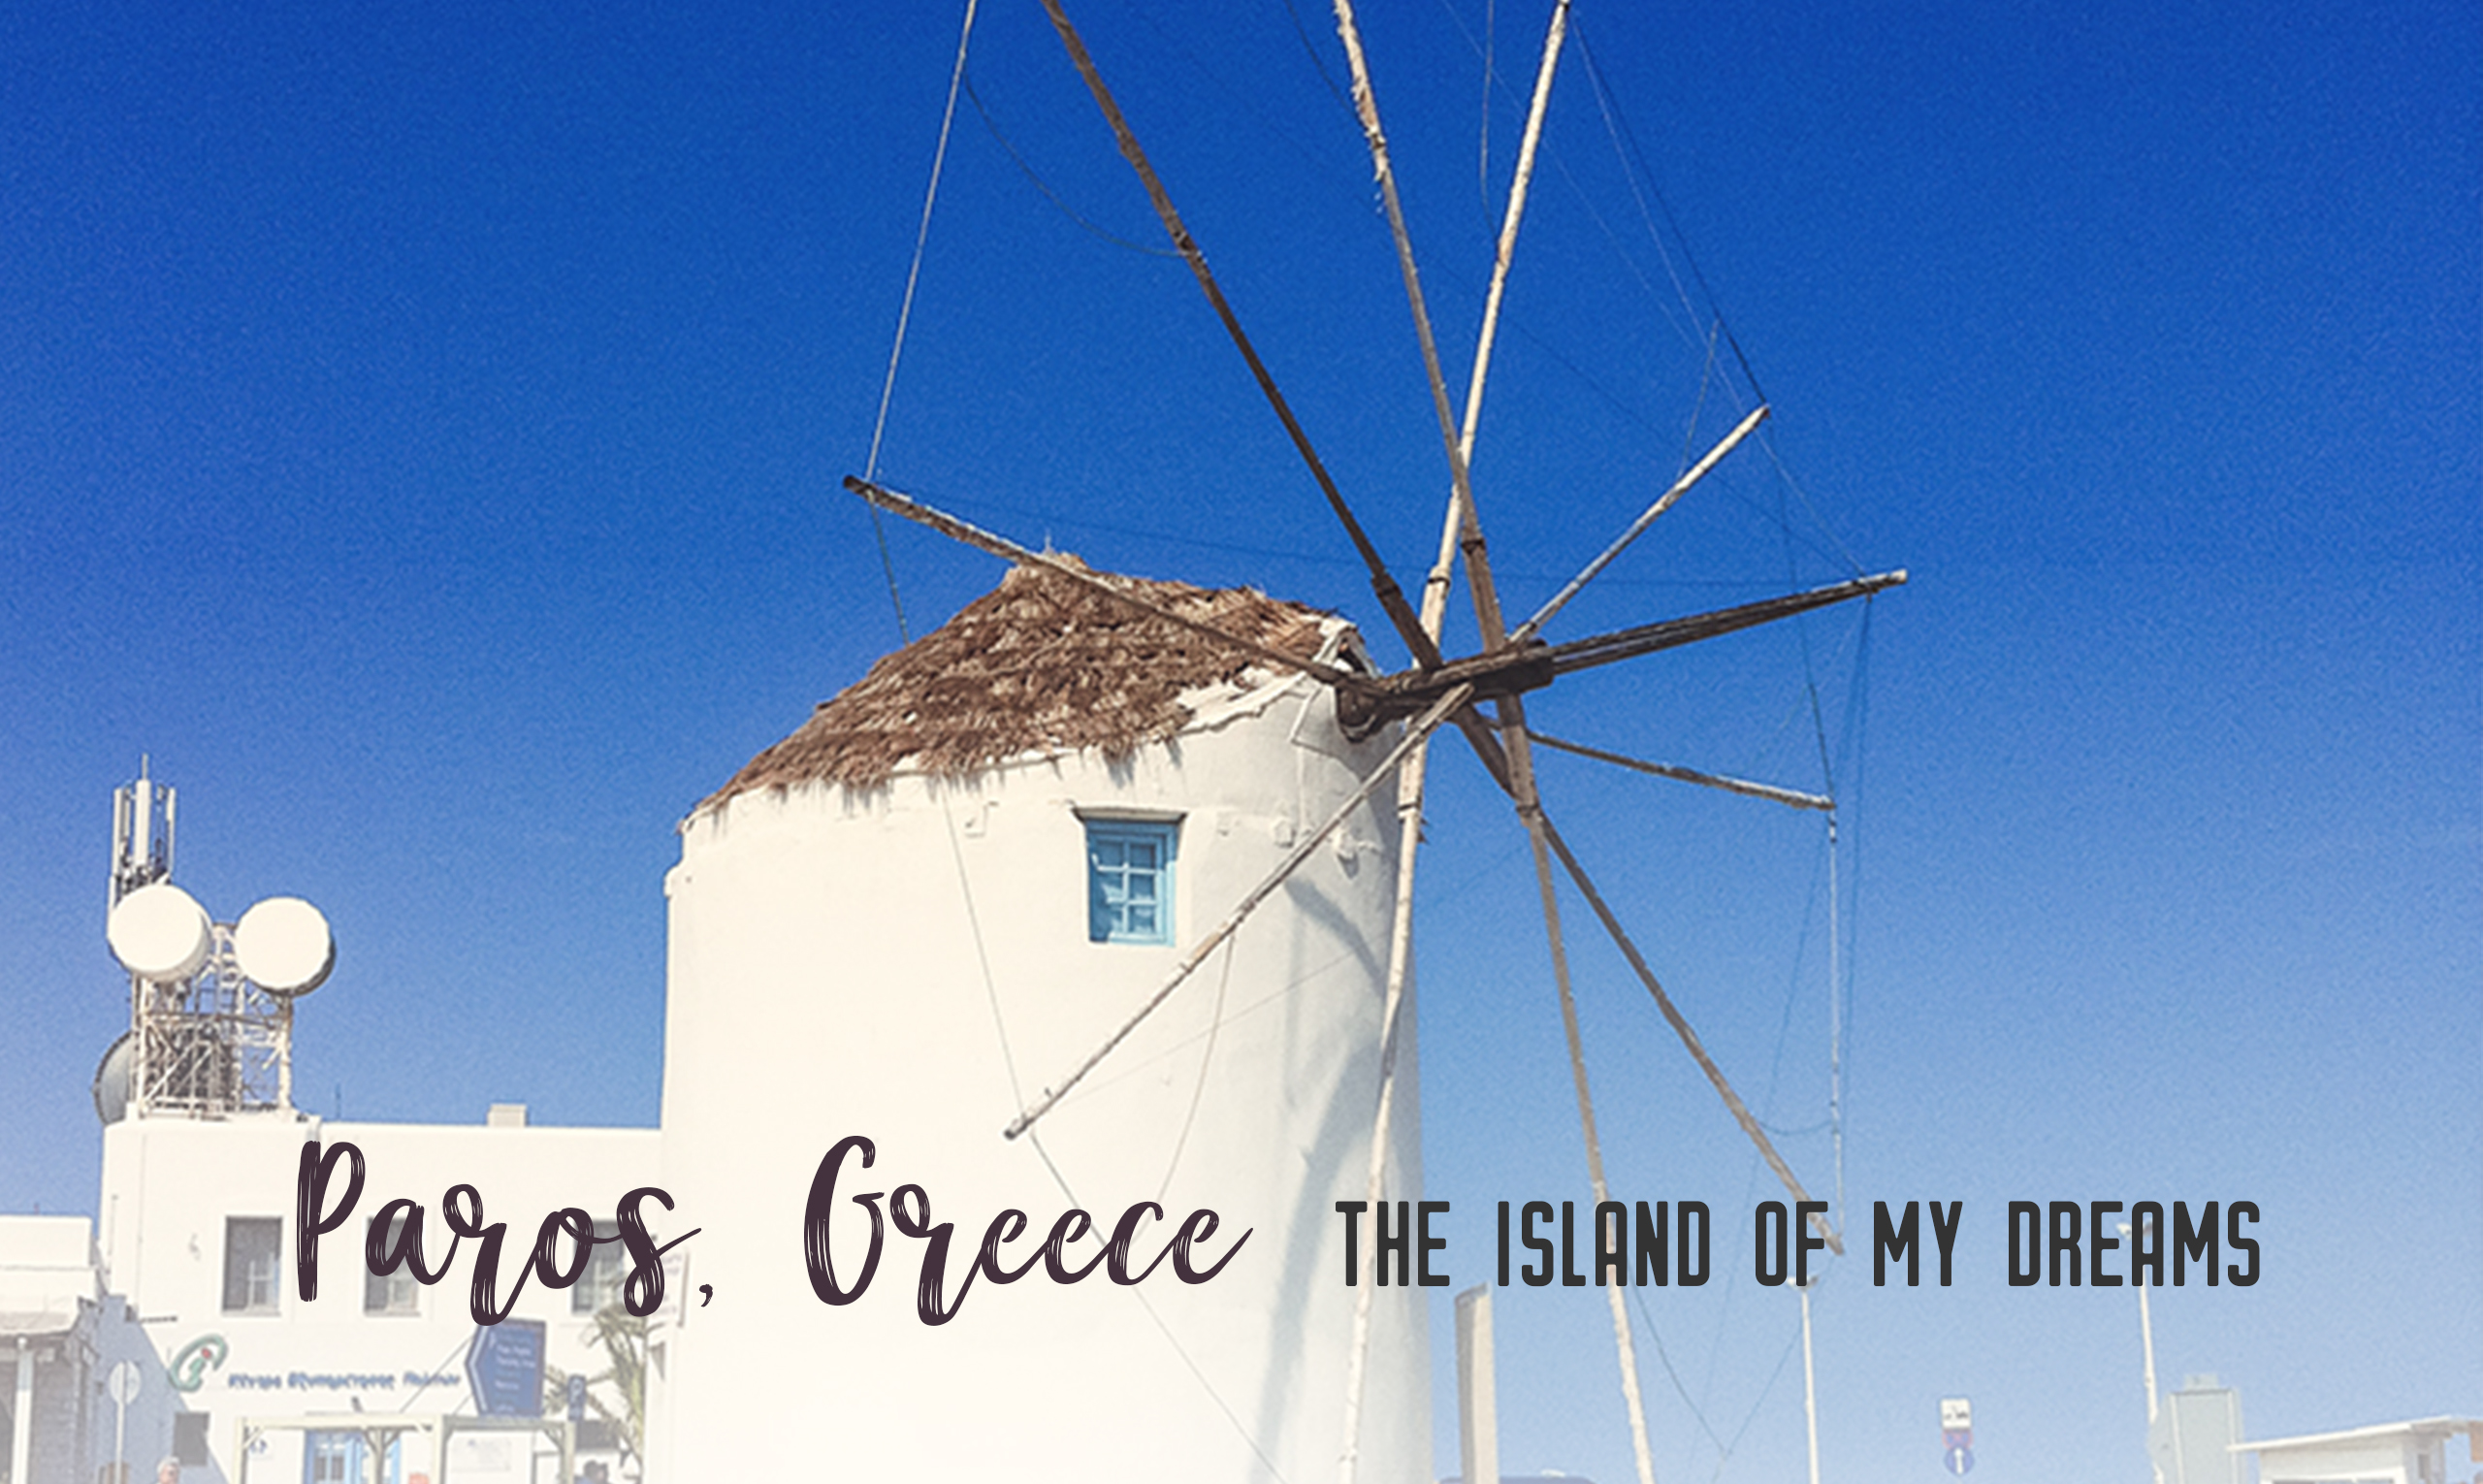 Paros, Greece, the island of my dreams | Paros is a relaxing getaway in the Greek Islands. Check out the beautiful town of Parikia, grab gelato, relax on one of its many beaches and enjoy the laid-back island vibe. | My Wandering Voyage